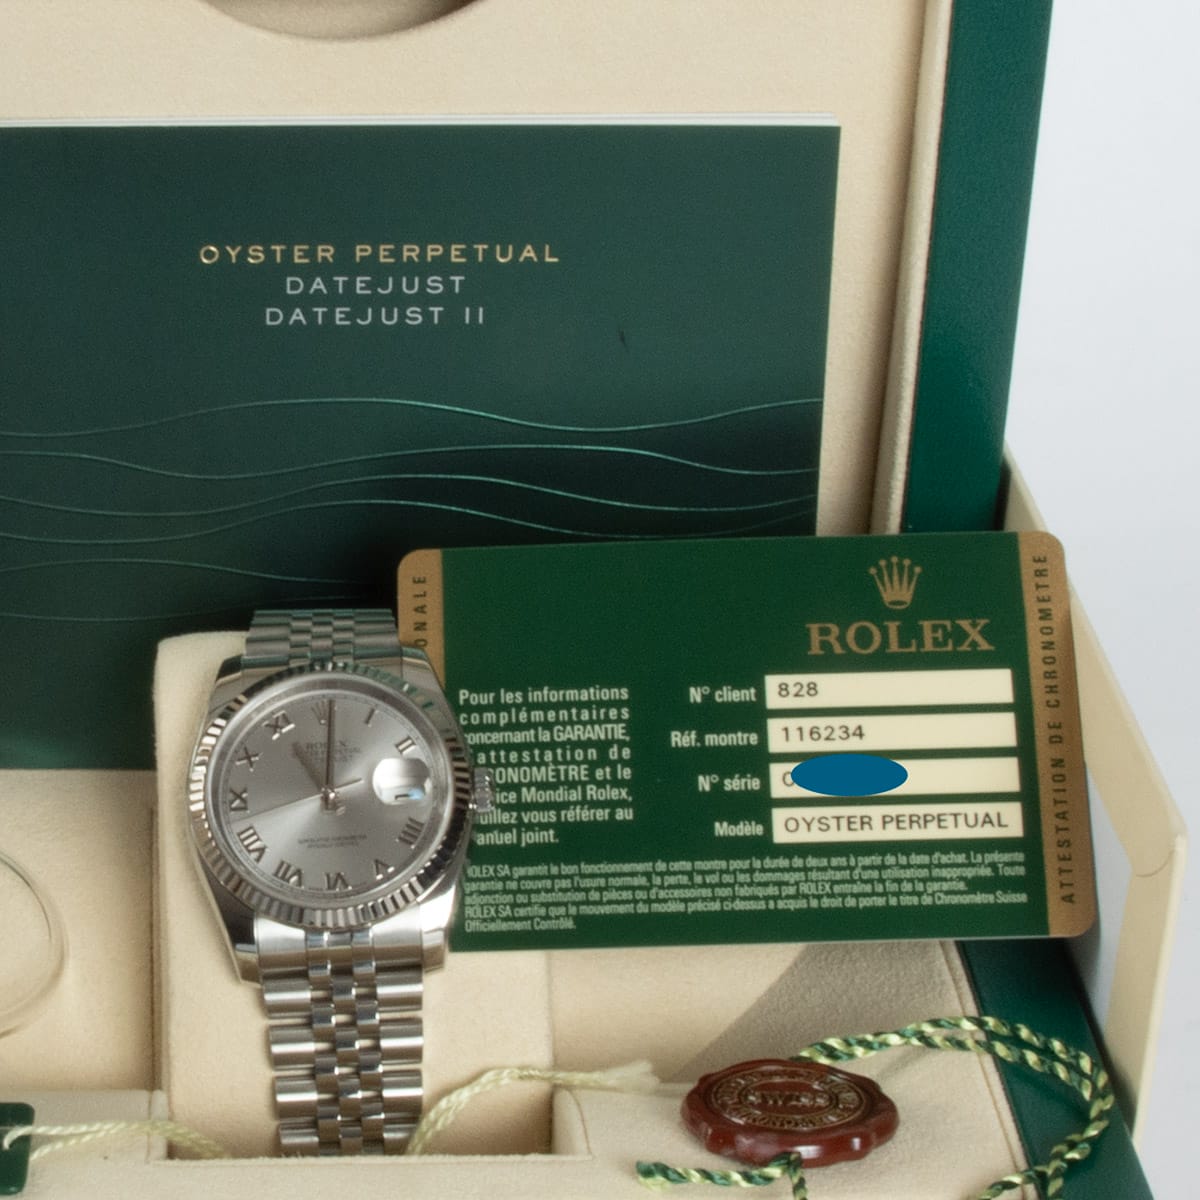 View in Box of Datejust 36